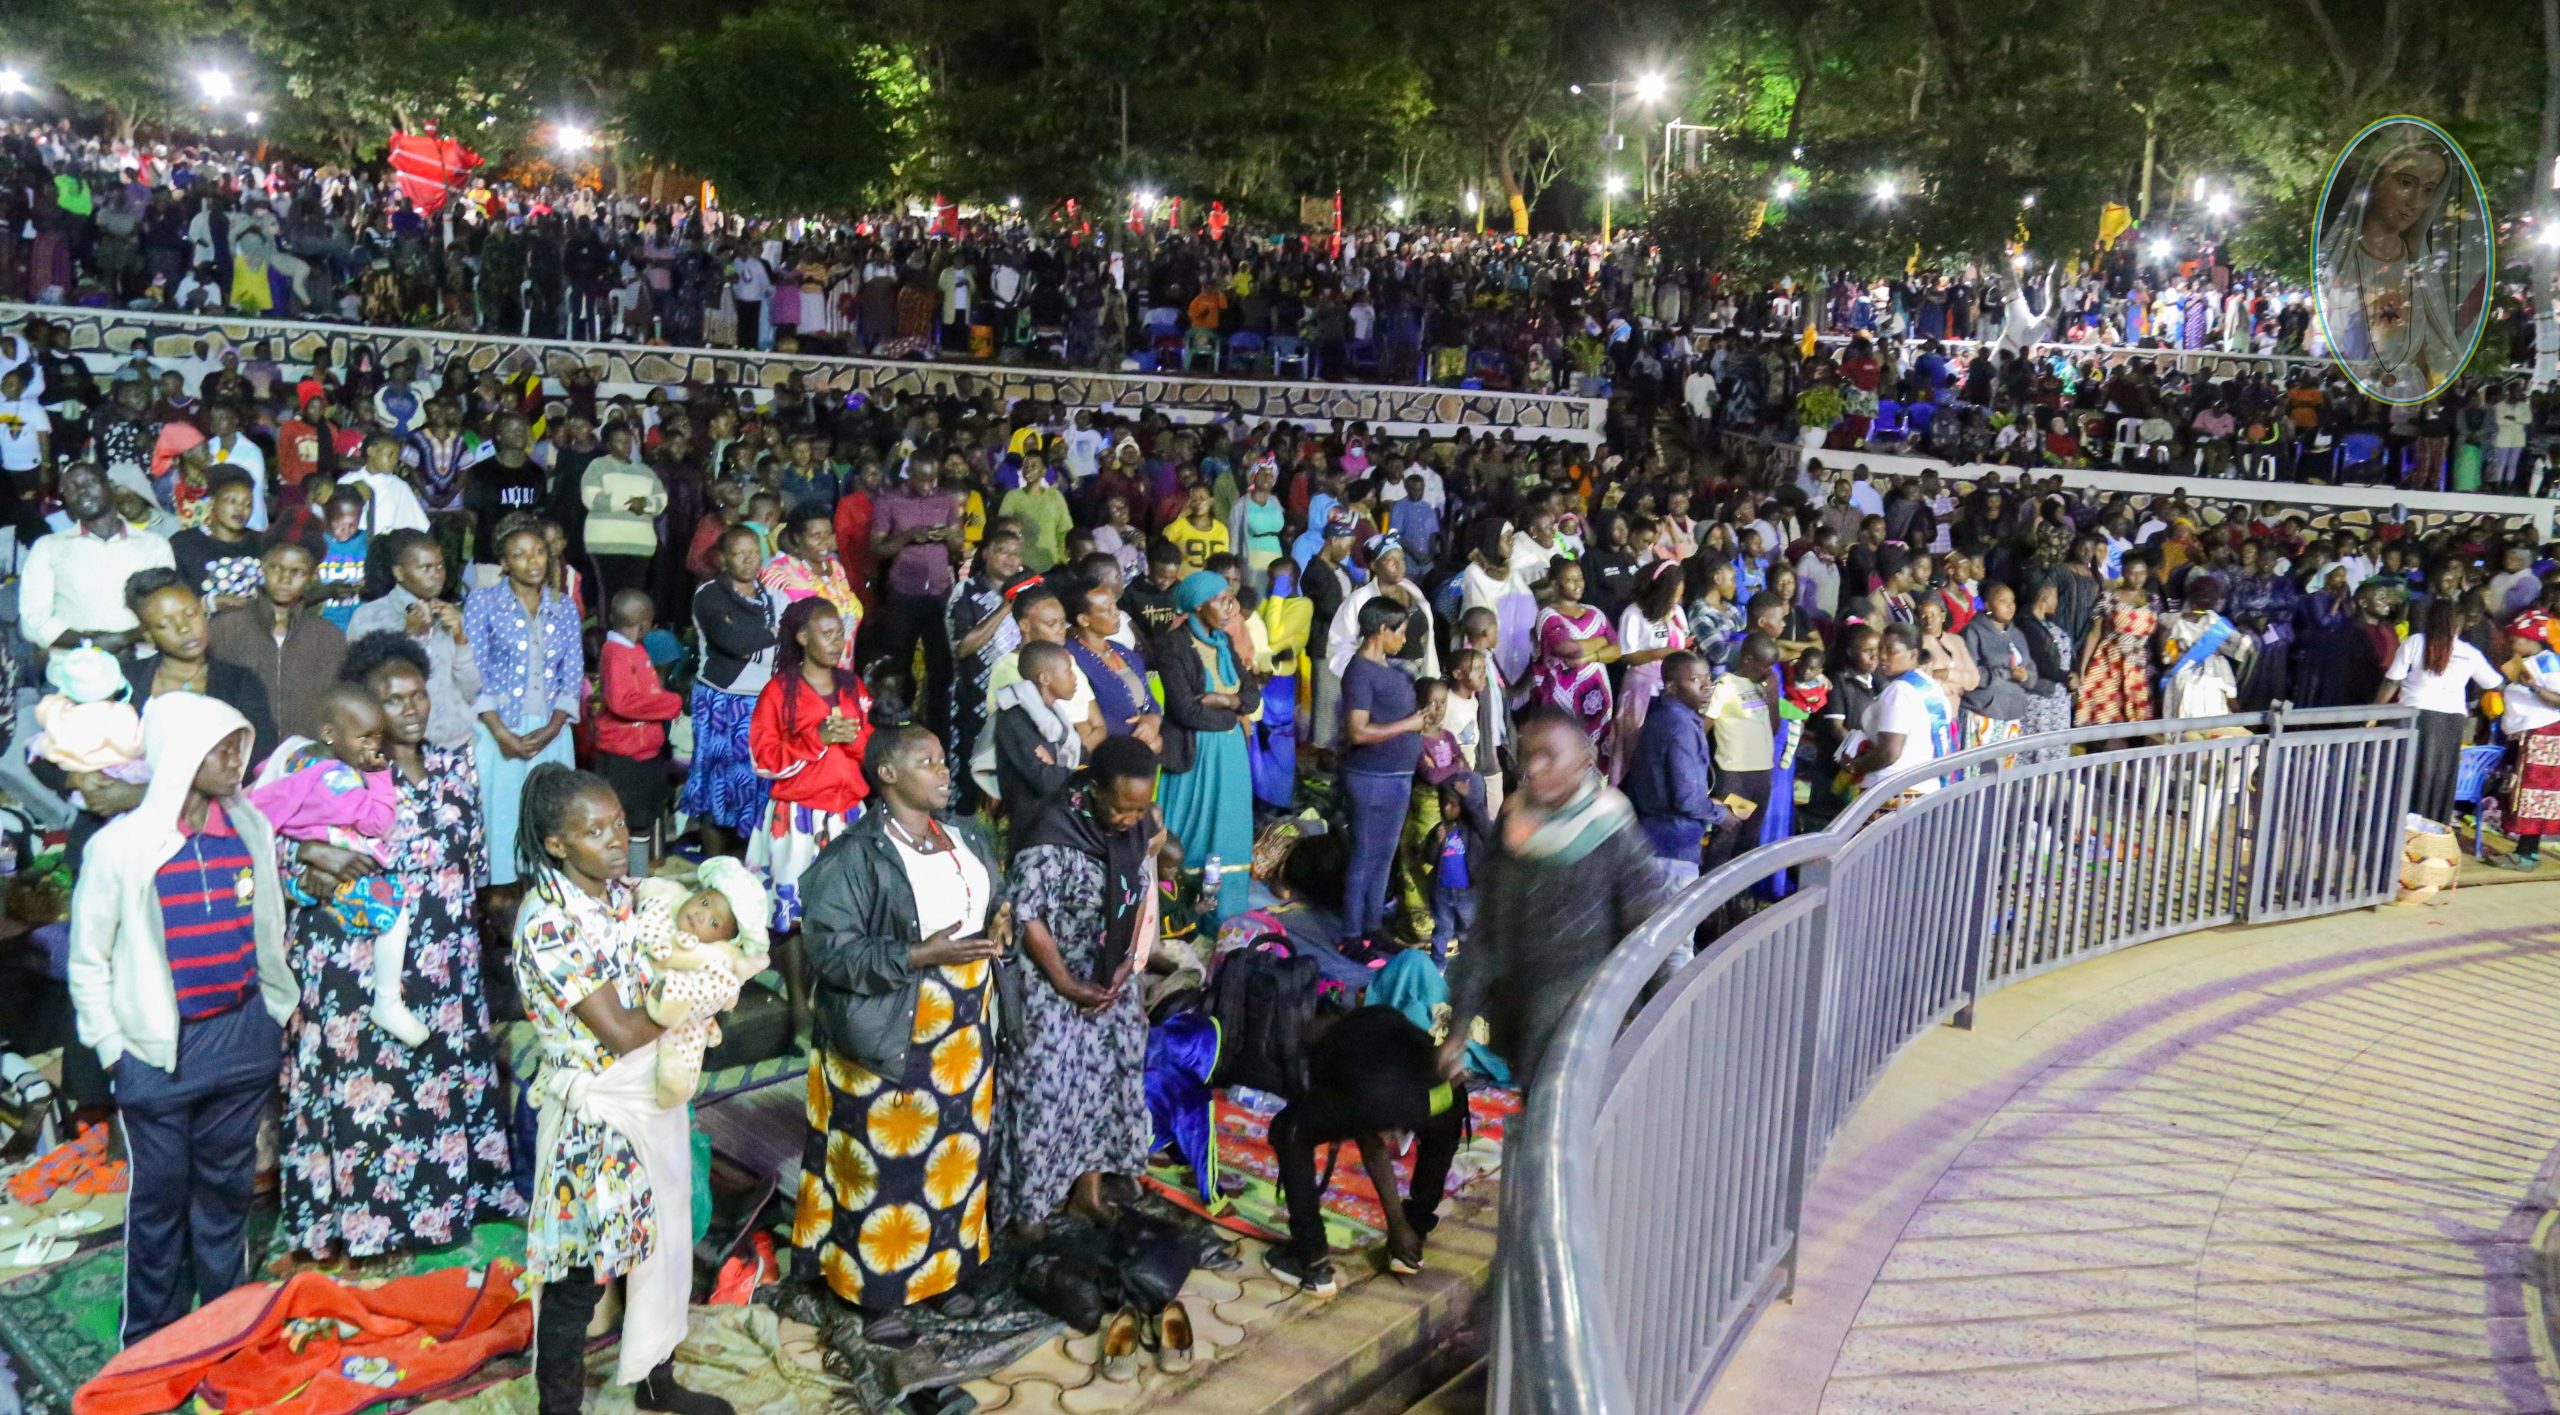 Kiwamirembe Mother Mary&#039;s Arena Arial View at Night Congration 2